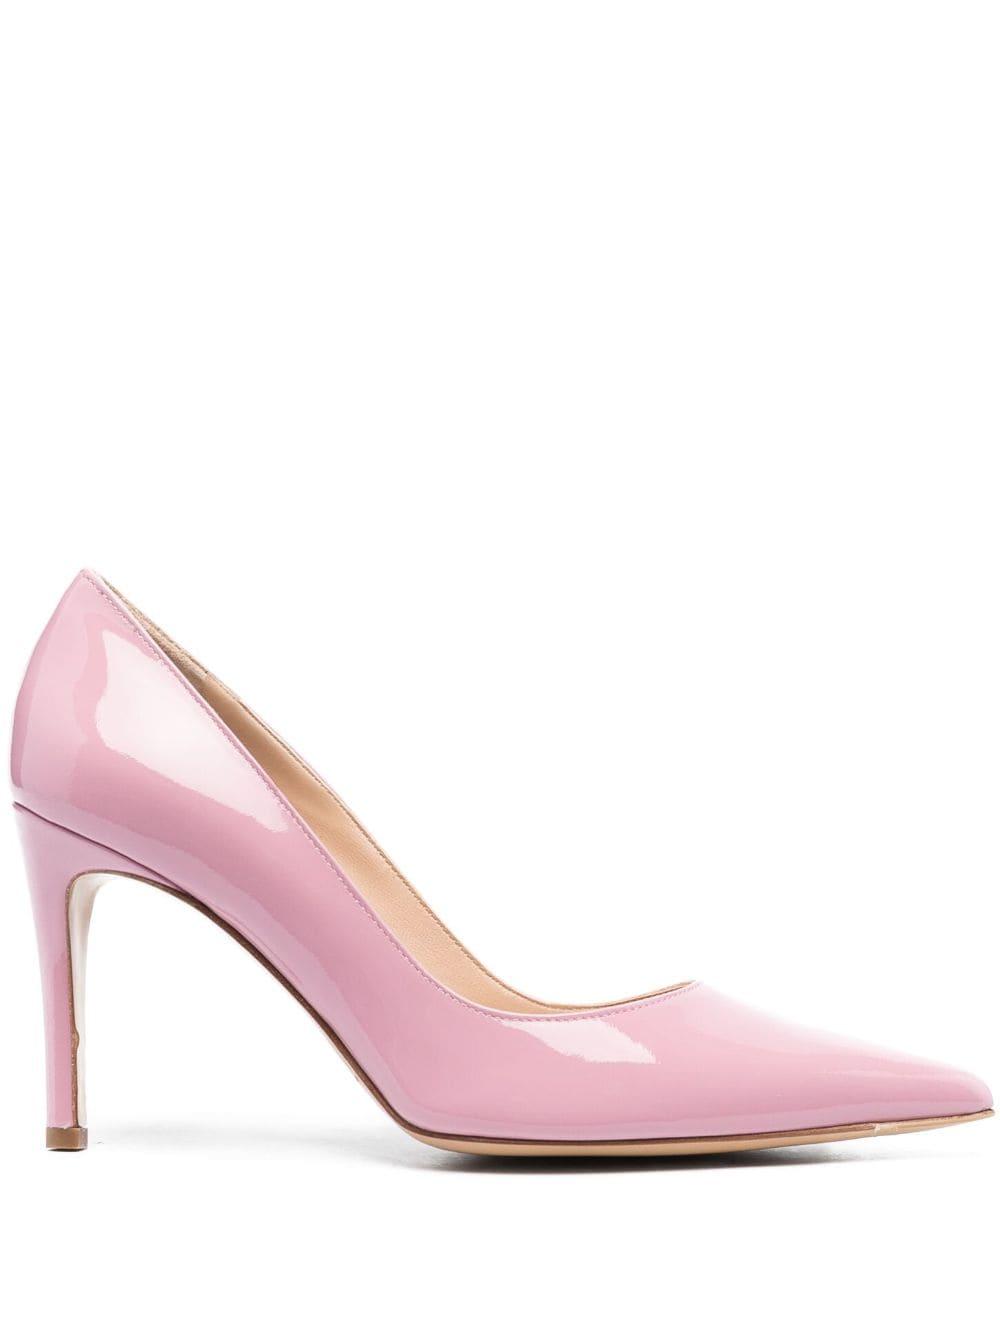 Roberto Festa Lory 90mm Patent Leather Pumps in Pink | Lyst